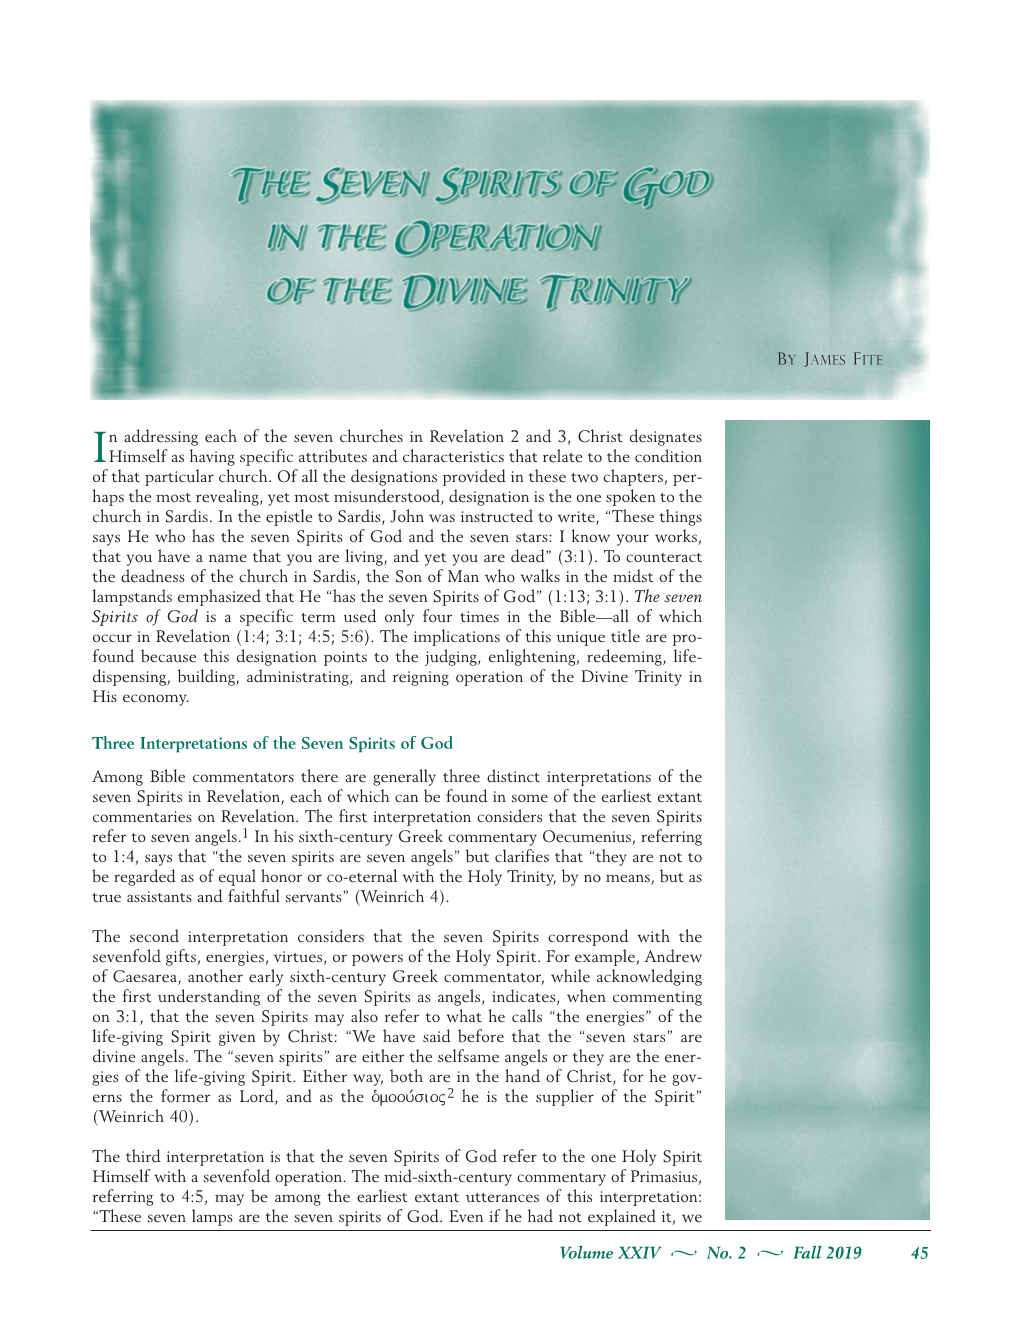 The Seven Spirits of God in the Operation of the Divine Trinity